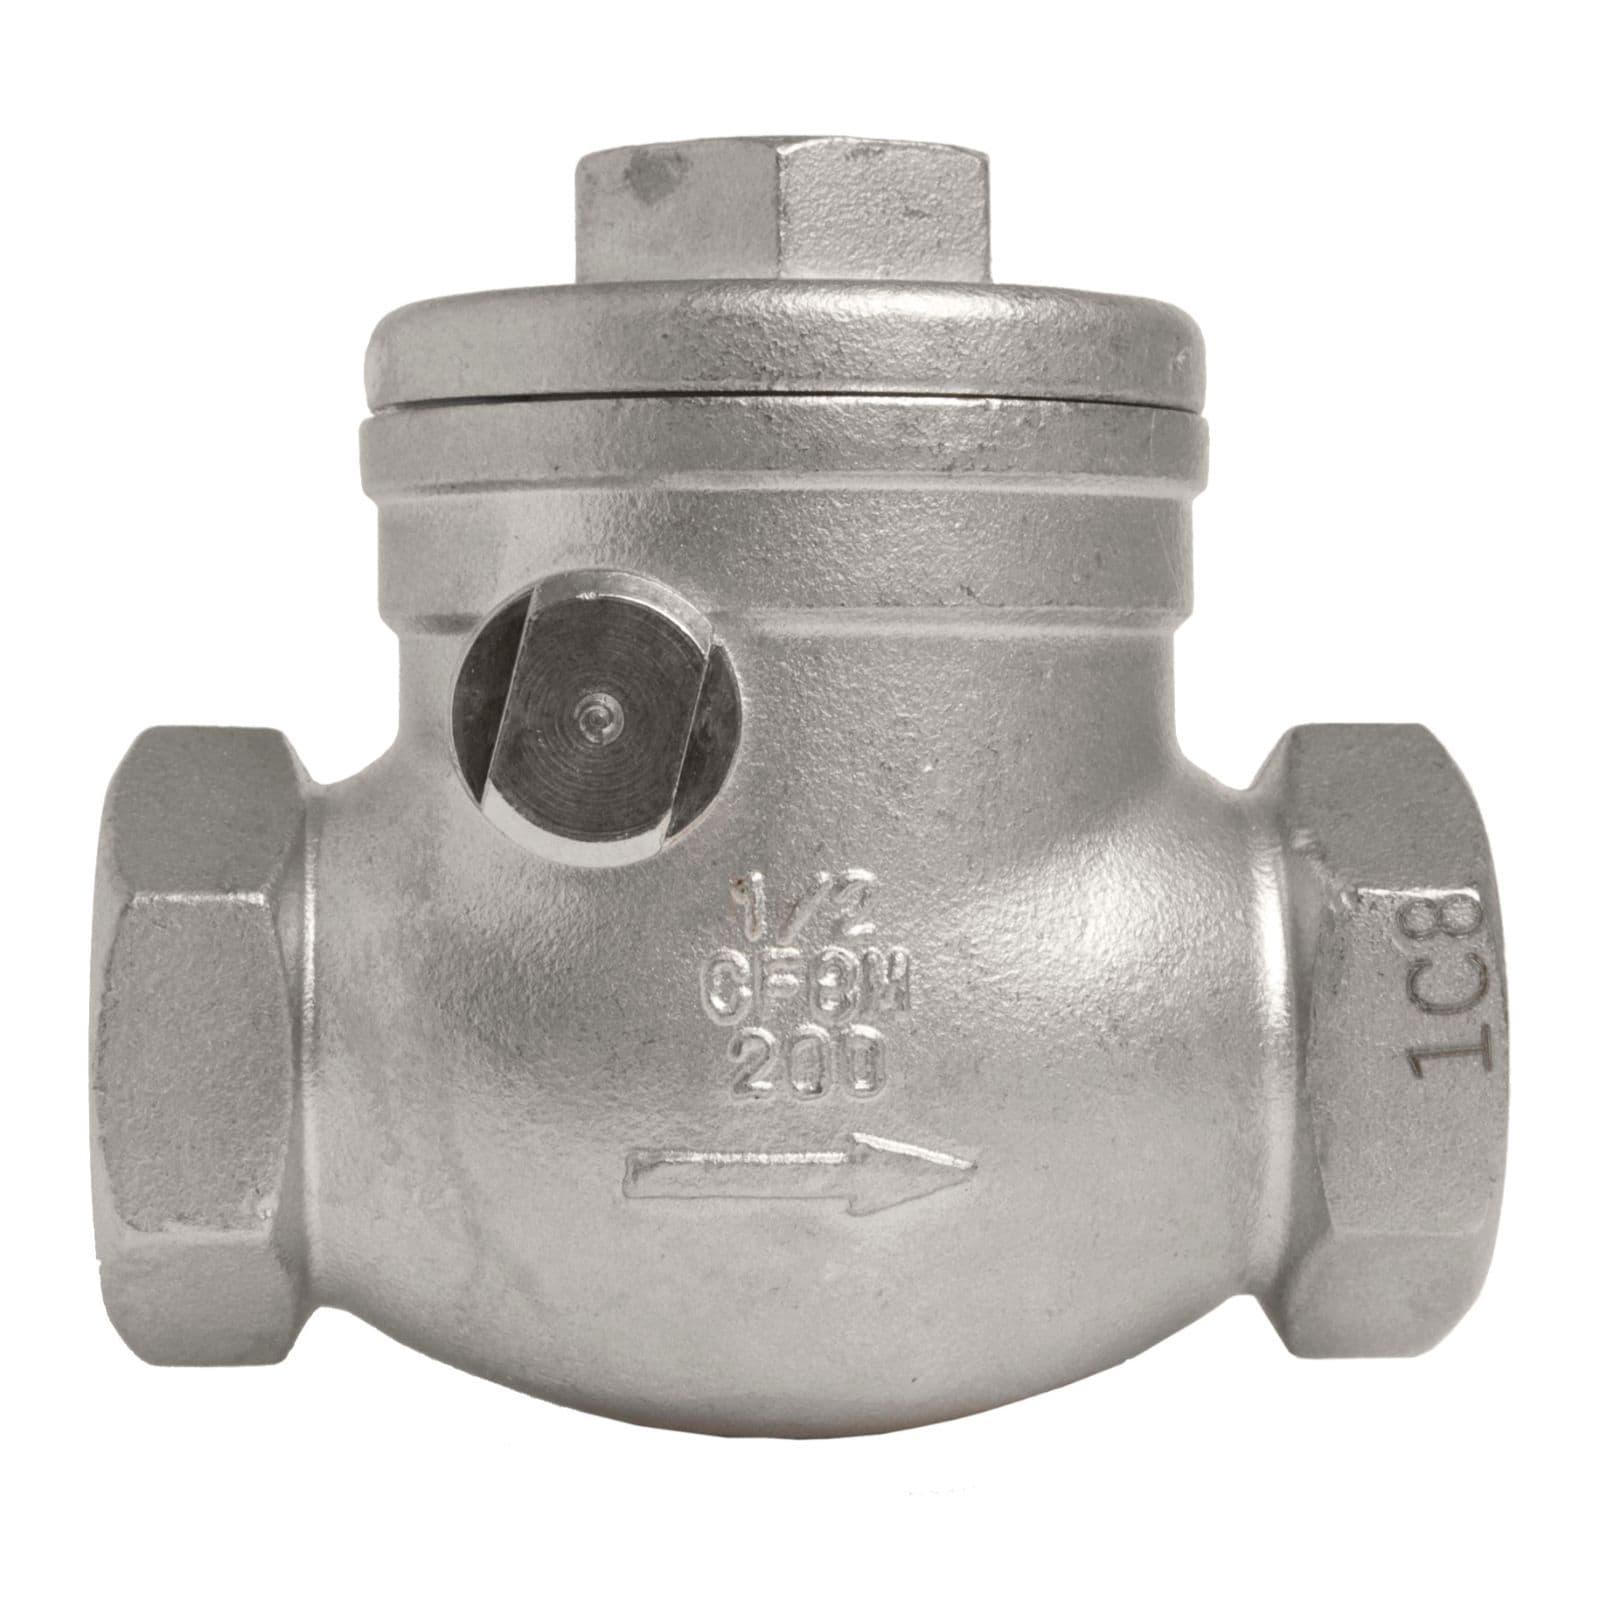 DERPIPE 1/2 Inch Vertical Check Valve SUS304 Spring Loaded Check Valve in-line Low Cracking Pressure CF8M WOG 1000